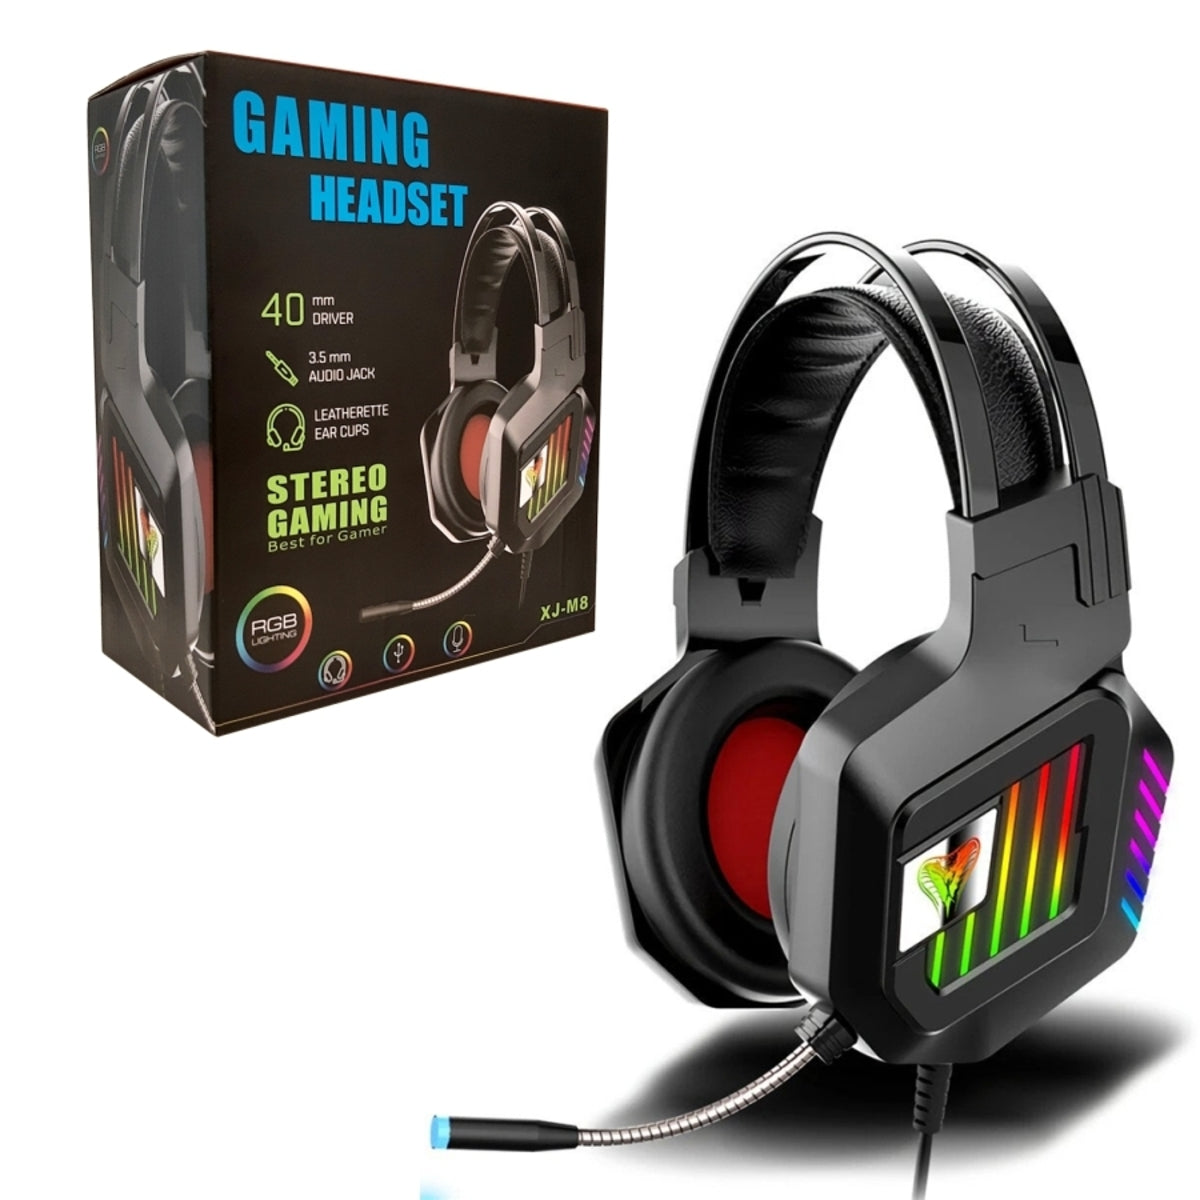 Headset Gaming PS4 RGB Light Xbox One Headset With Noise Canceling Mic PC Headset With Stereo Surround Sound